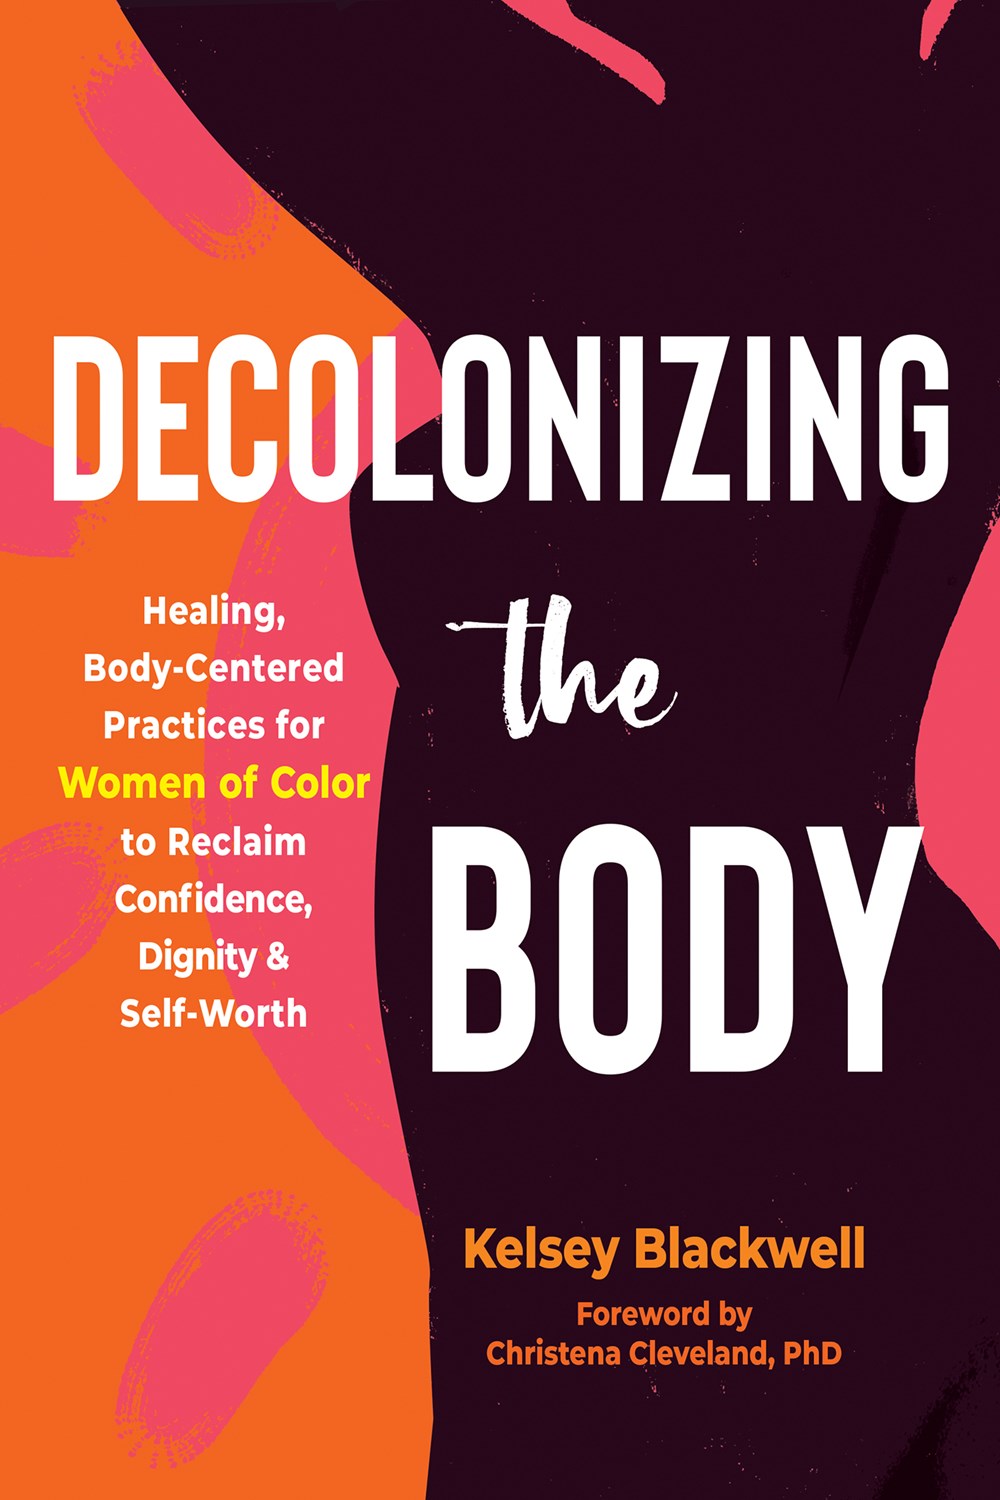 Decolonizing the Body: Healing, Body-Centered Practices for Women of Color to Reclaim Confidence, Dignity, and Self-Worth